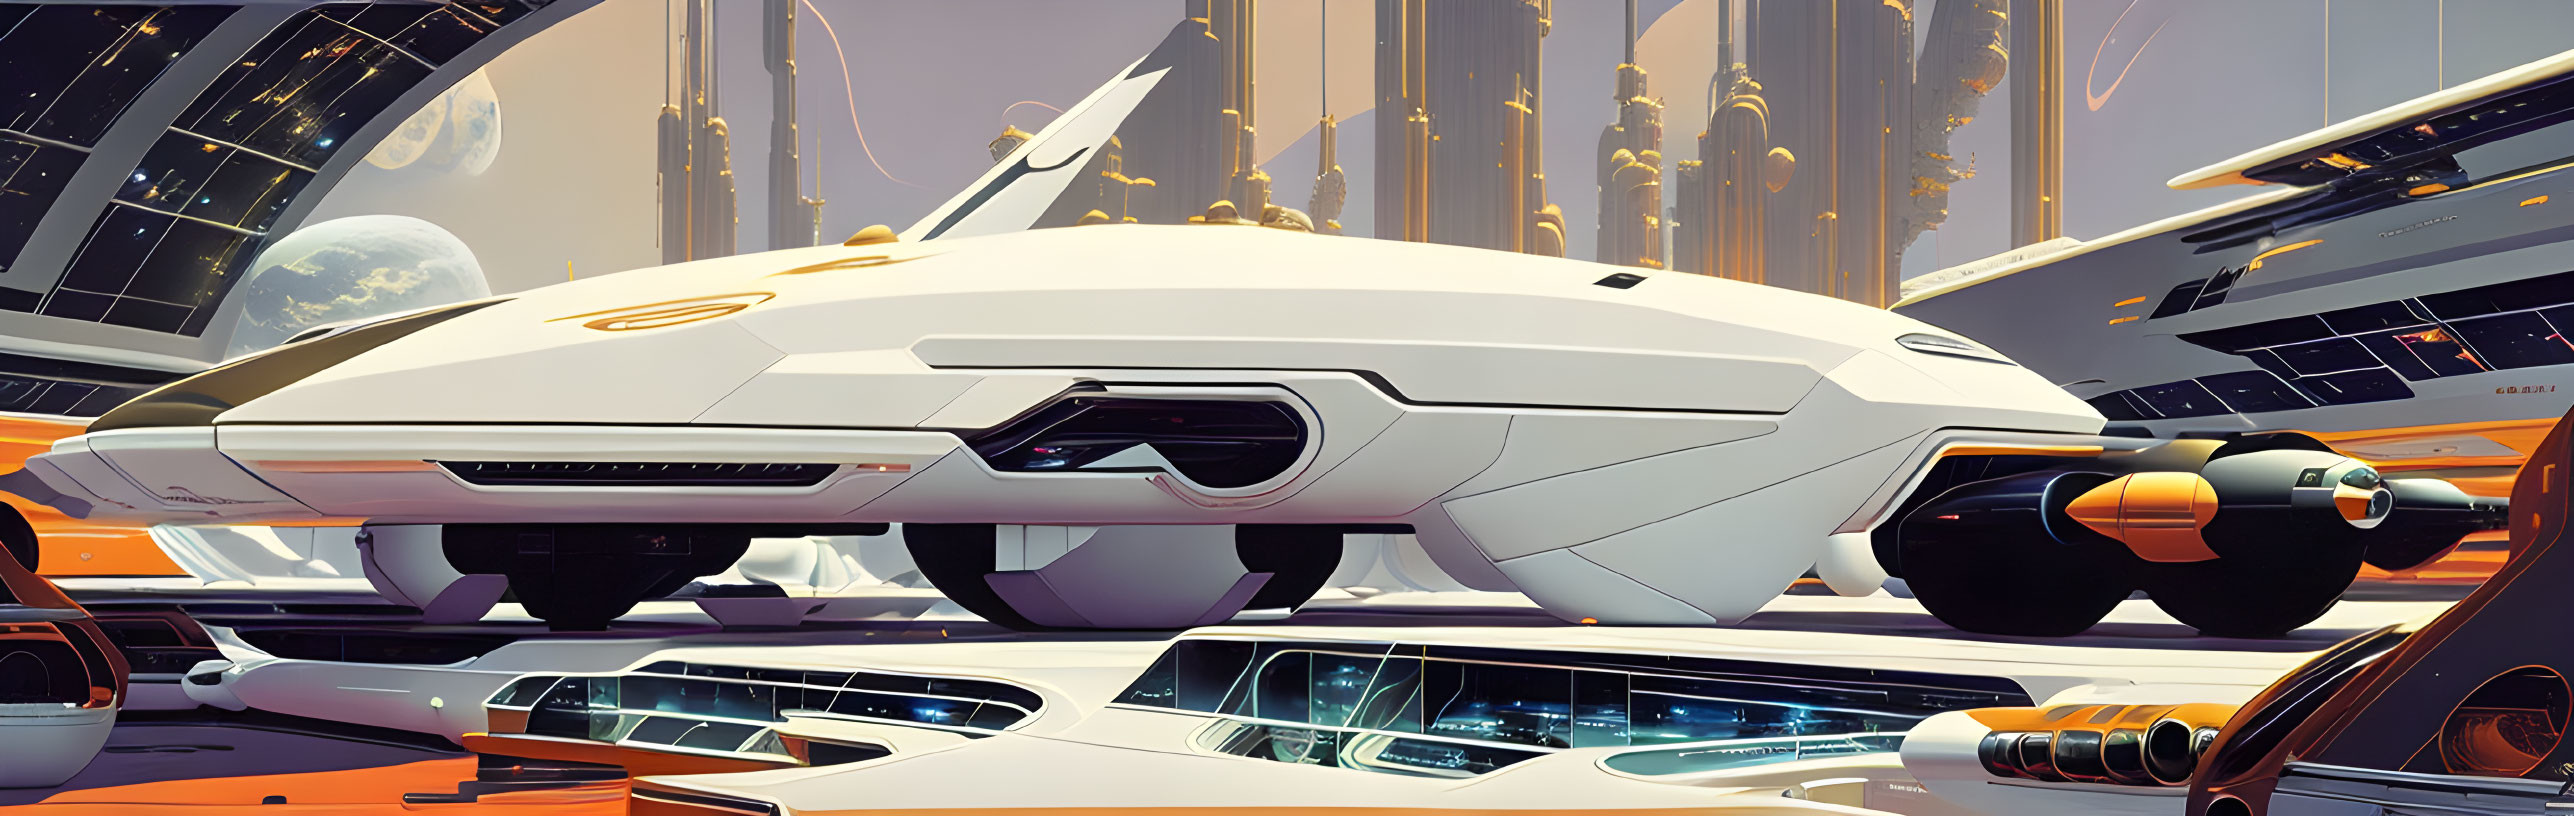 space probe By Syd Mead